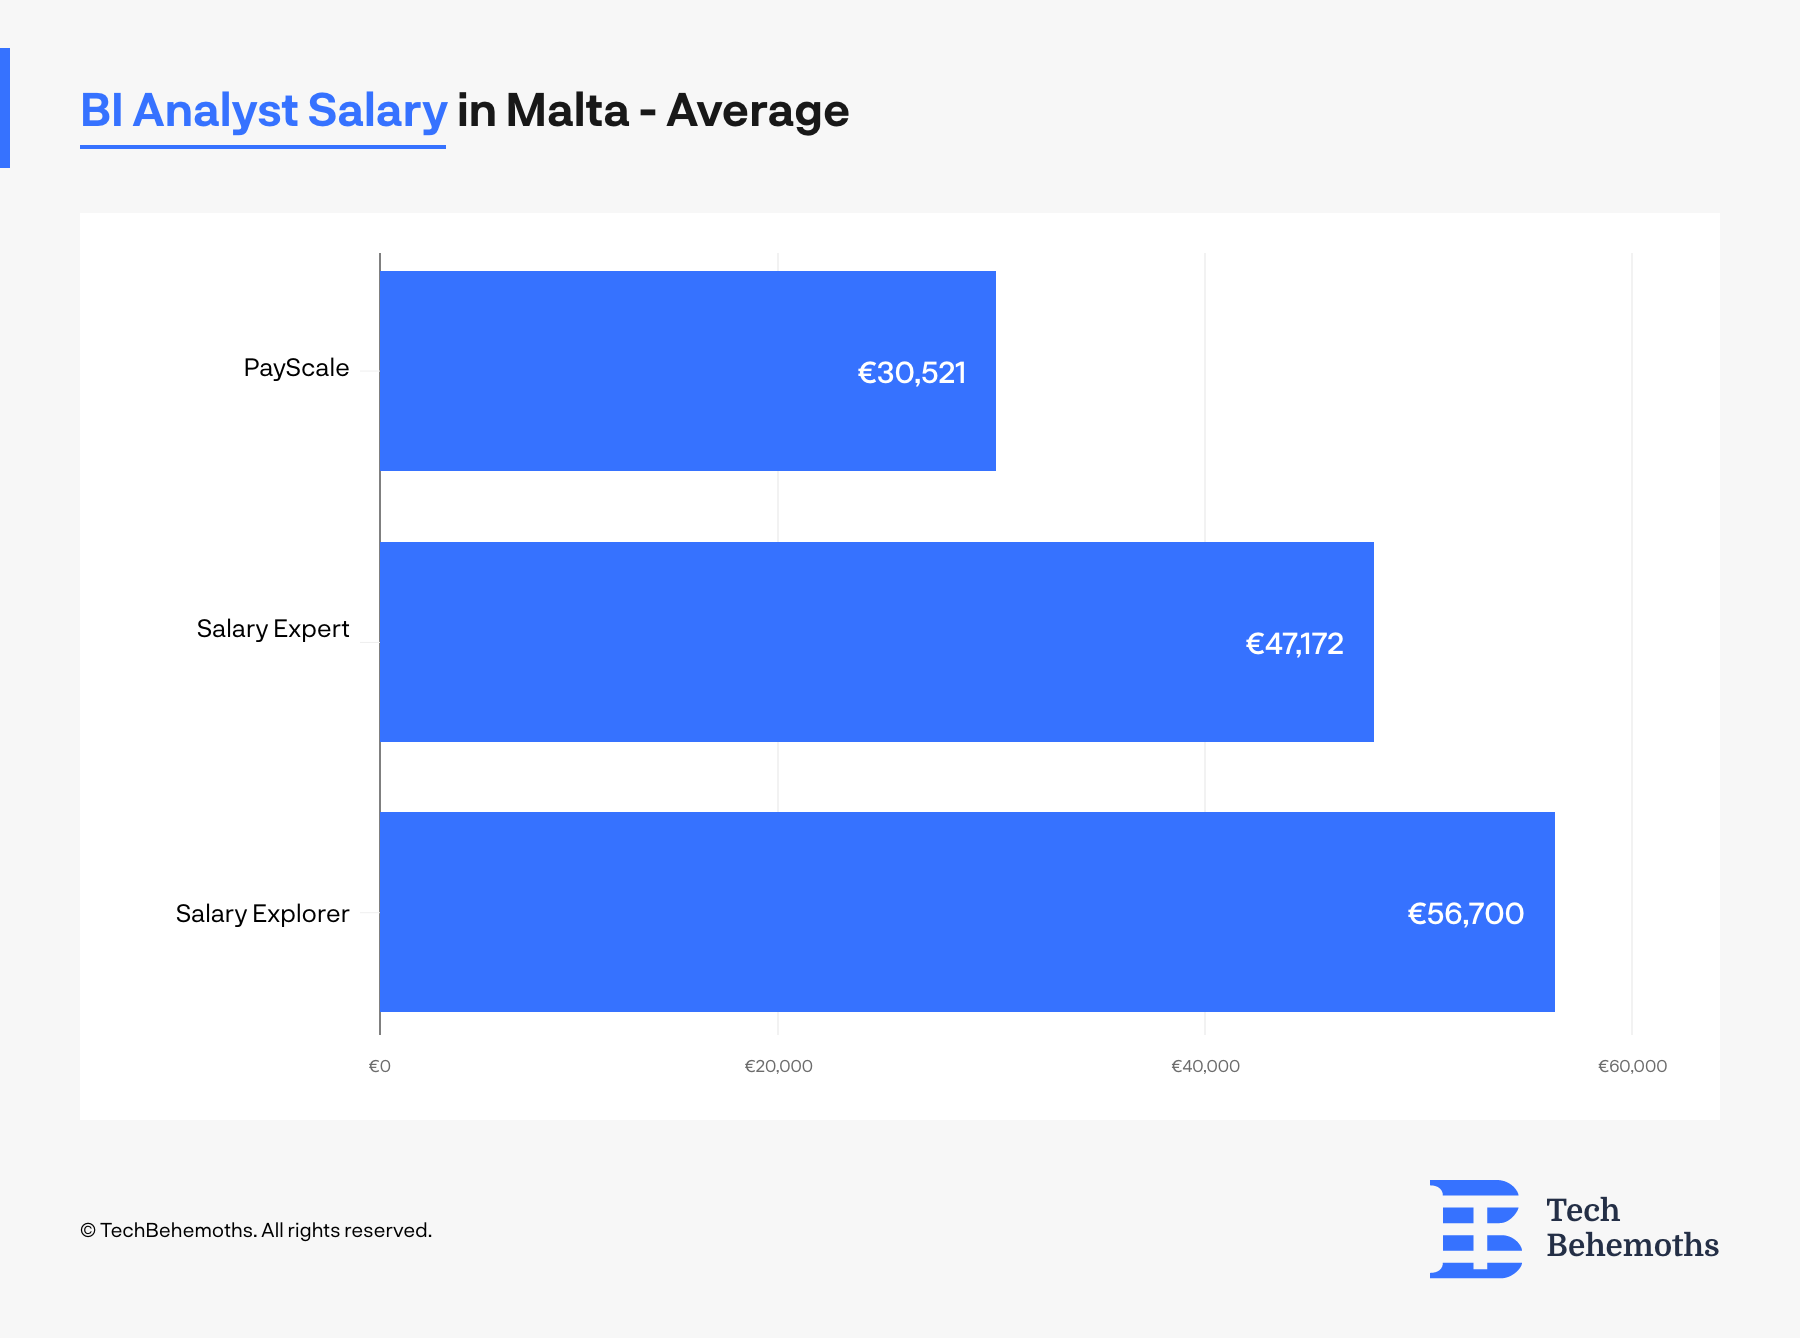 Business Intelligence Analysts salaries in Malta acording to PayScale, SalaryExpert and SalaryExplorer